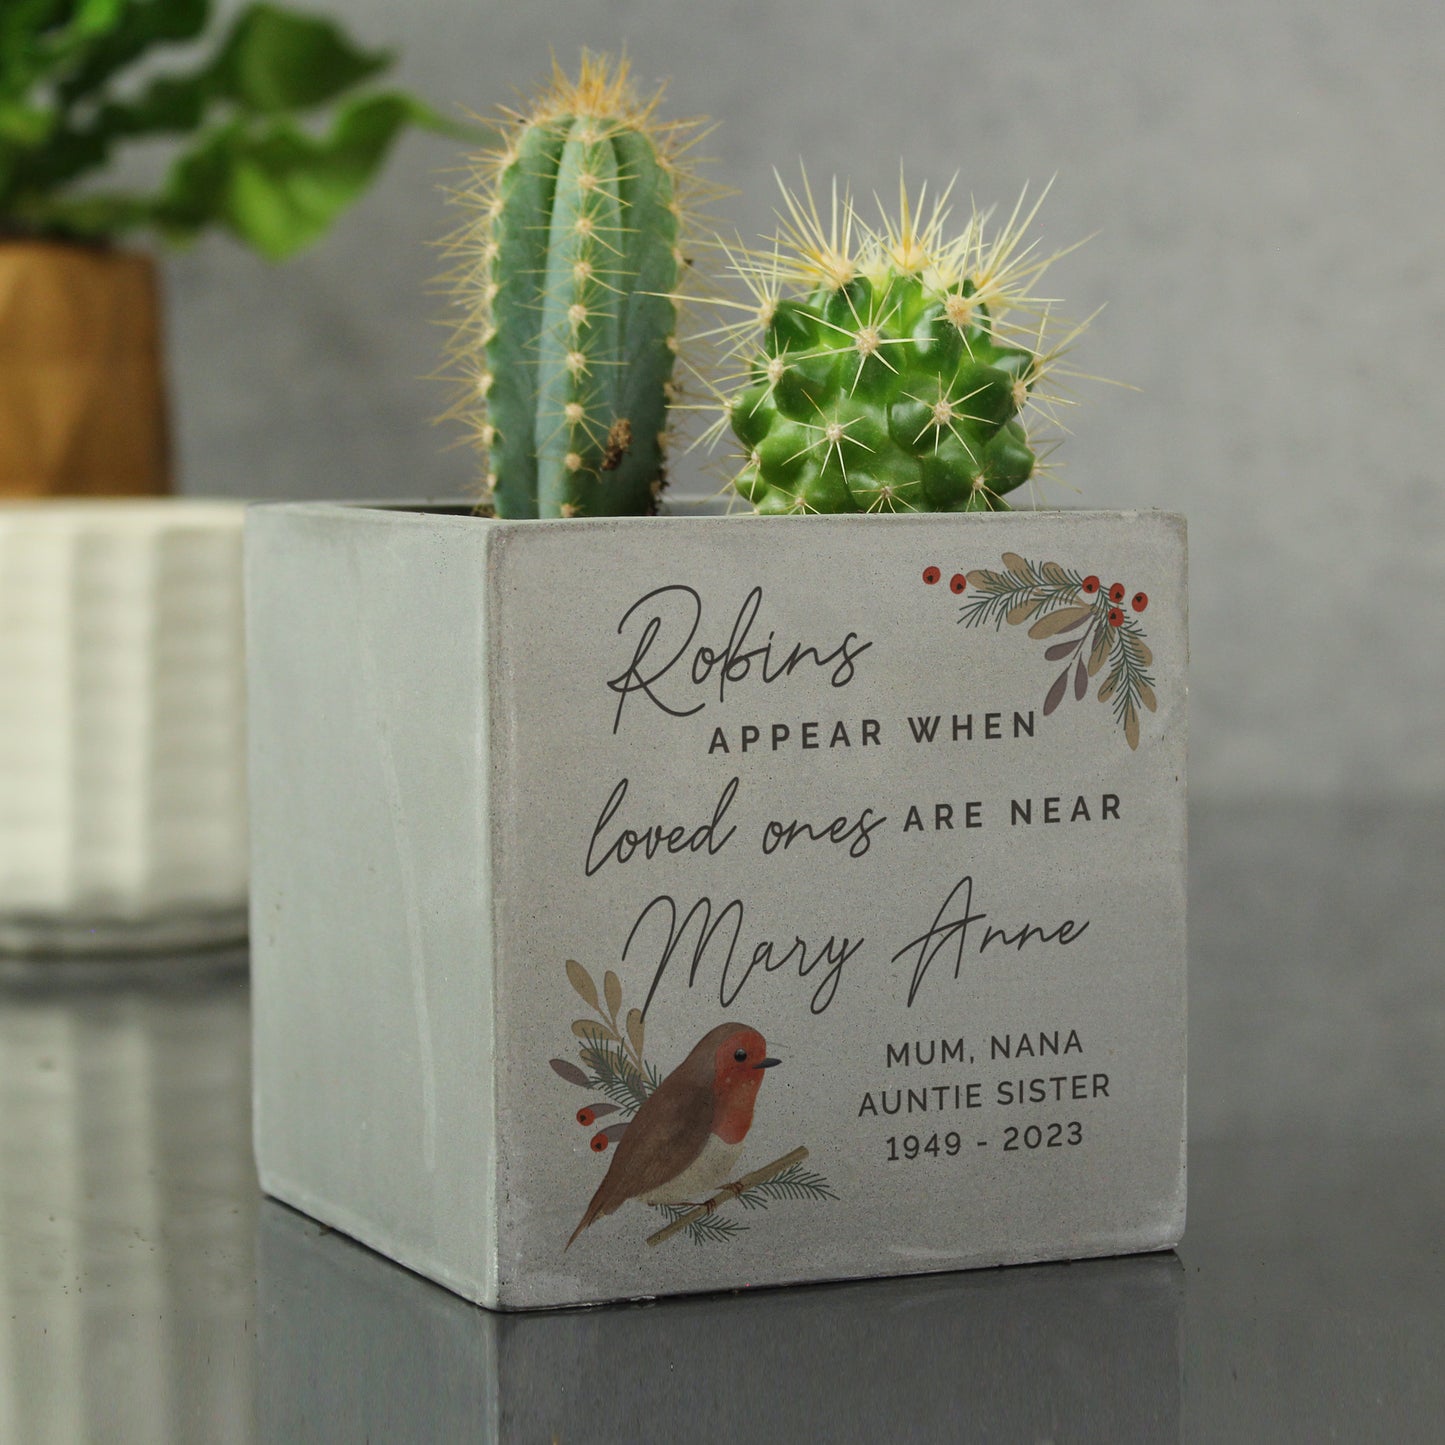 Personalised Robins Appear Concrete Pot